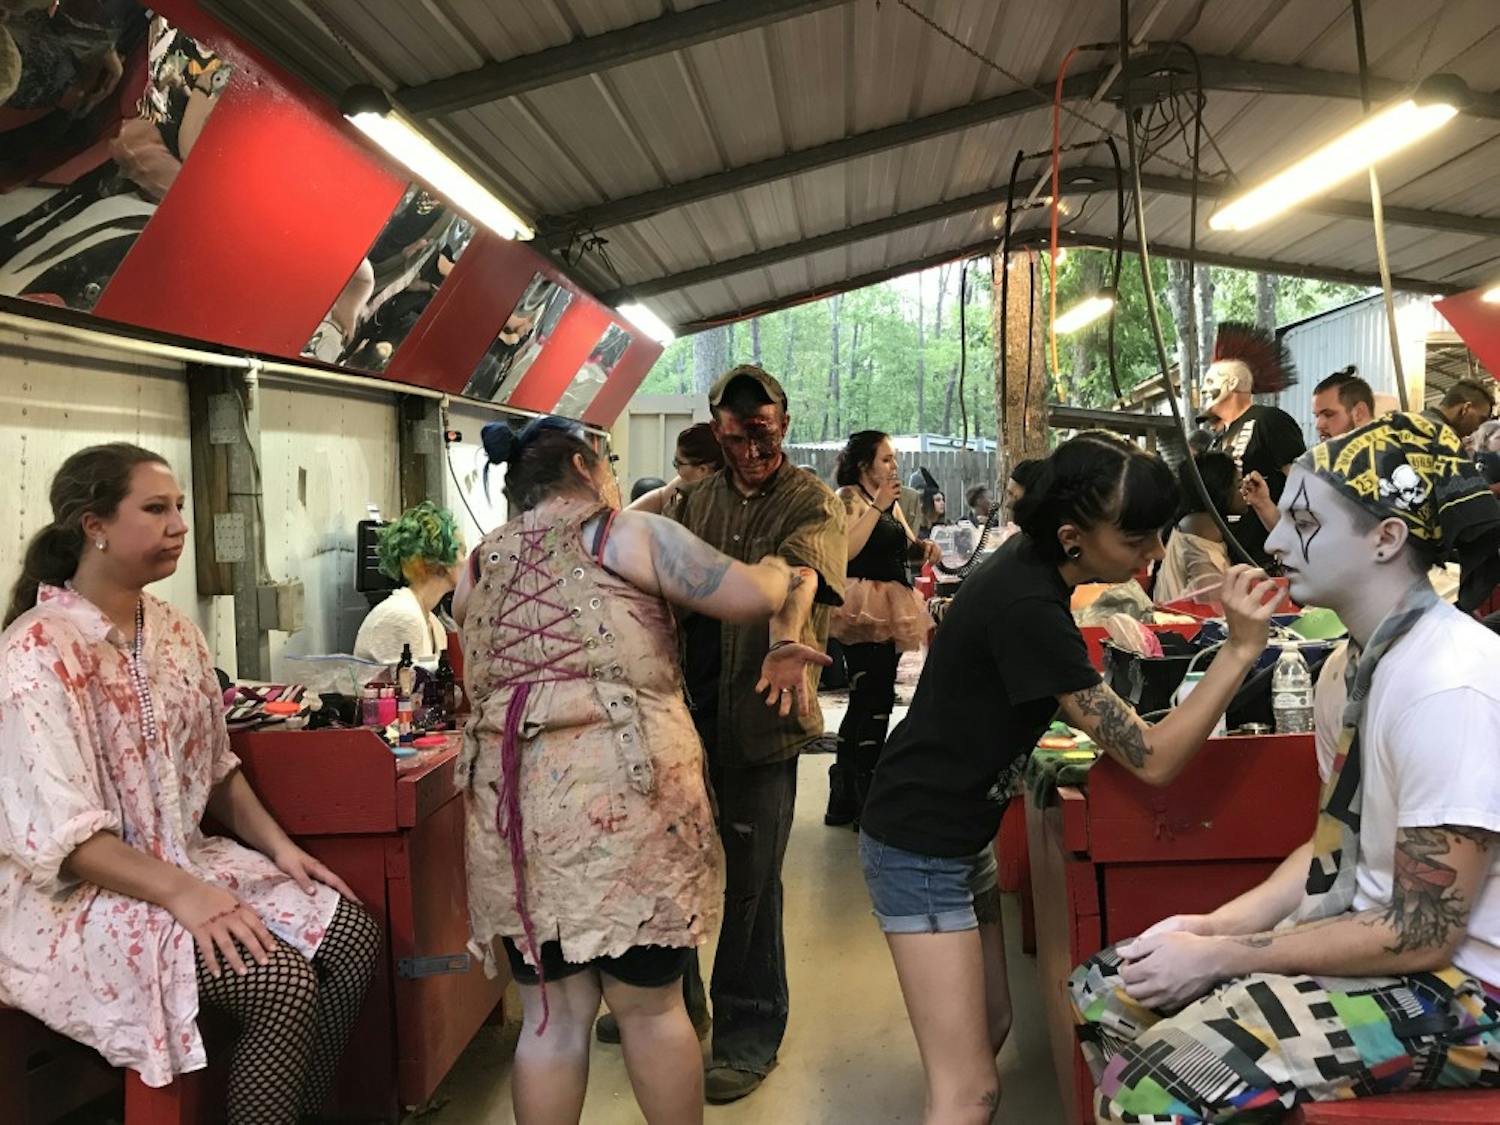 The Woods of Terror in Greensboro has a staff of 75 makeup artists and 100 performers.